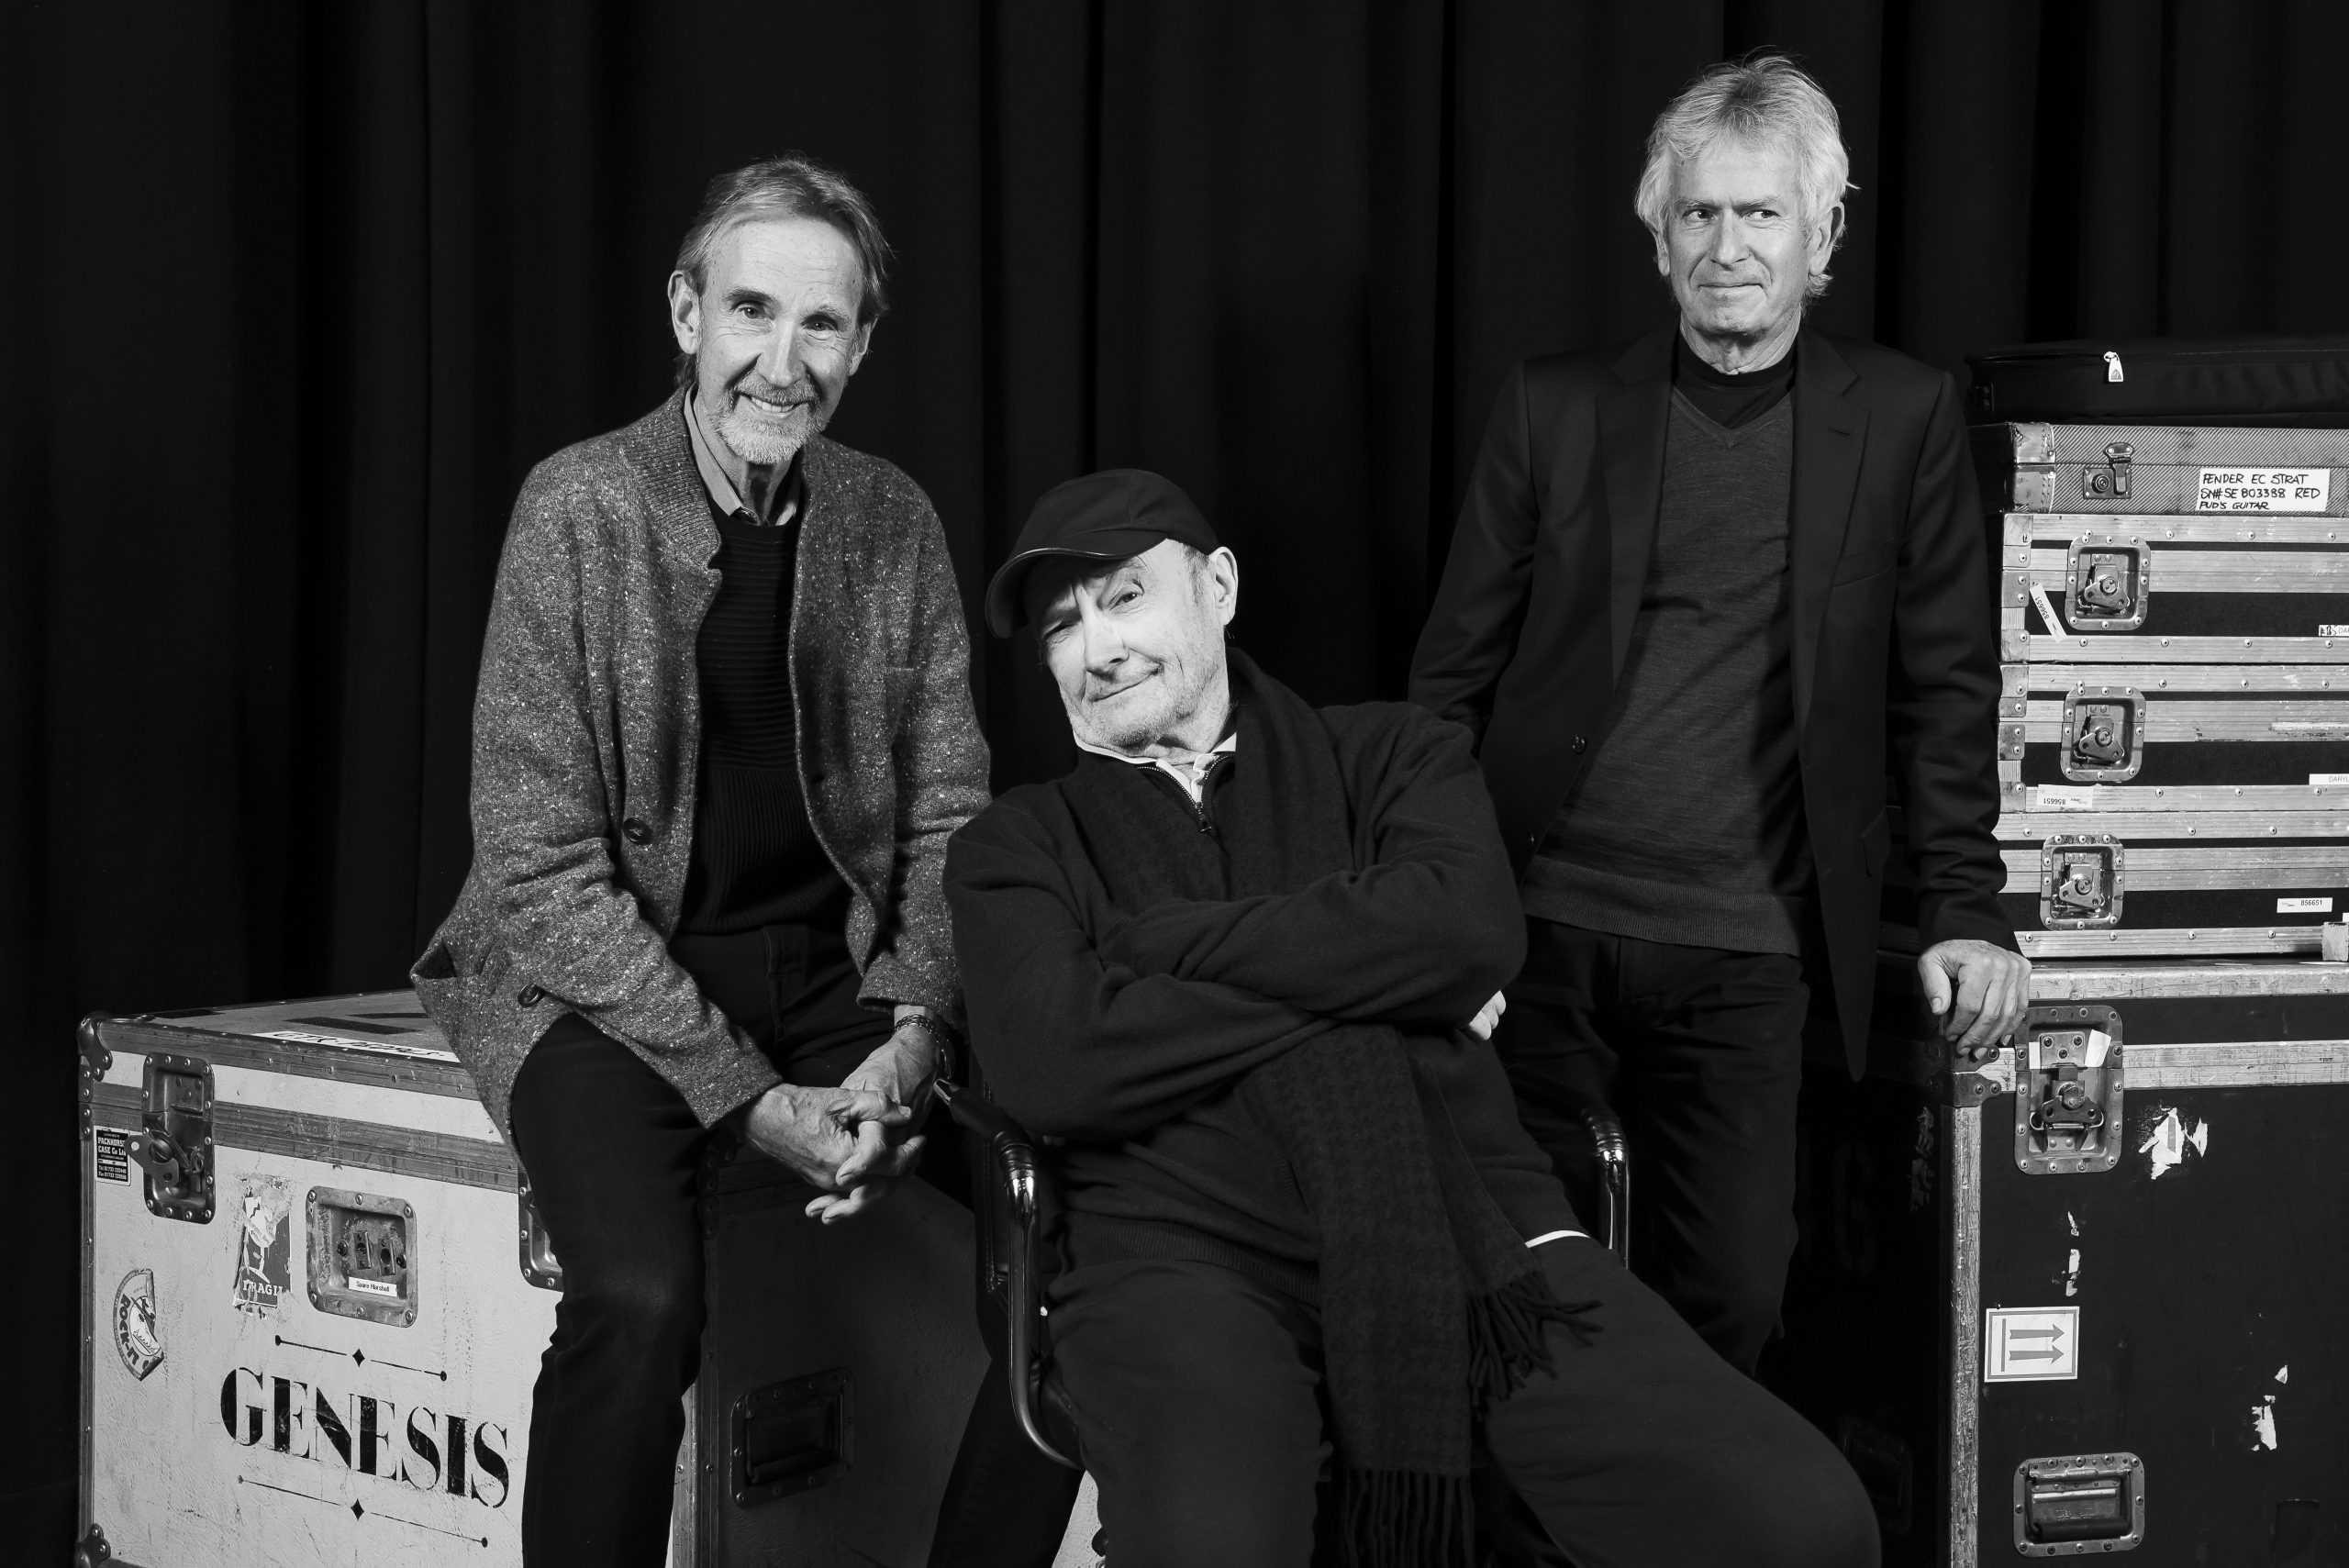 Genesis Reunite and Start Rehearsals All About The Rock